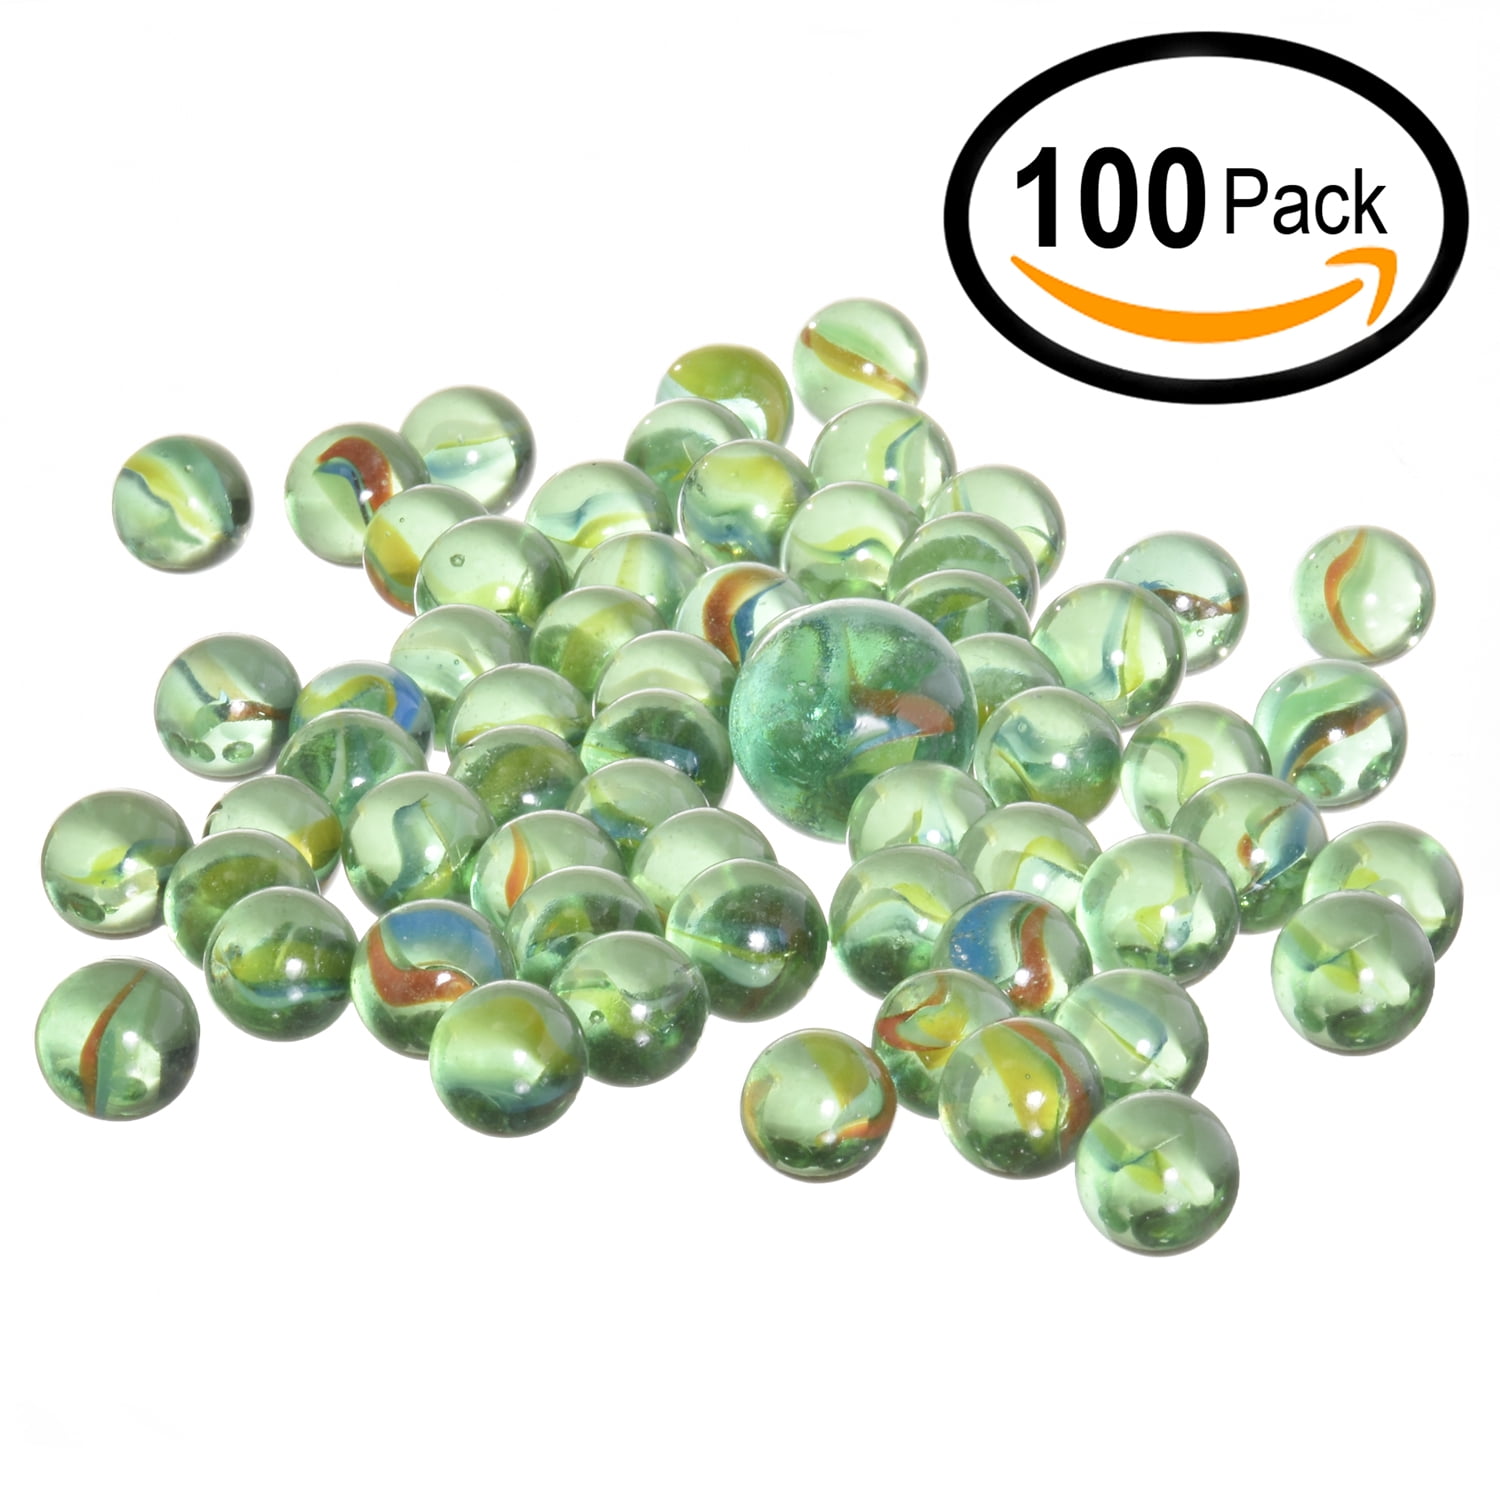 GLASS MARBLES GREEN PACK UP TO 150 CHILDREN’S TOY OR DECORATOR OR CRAFT MARBLES 